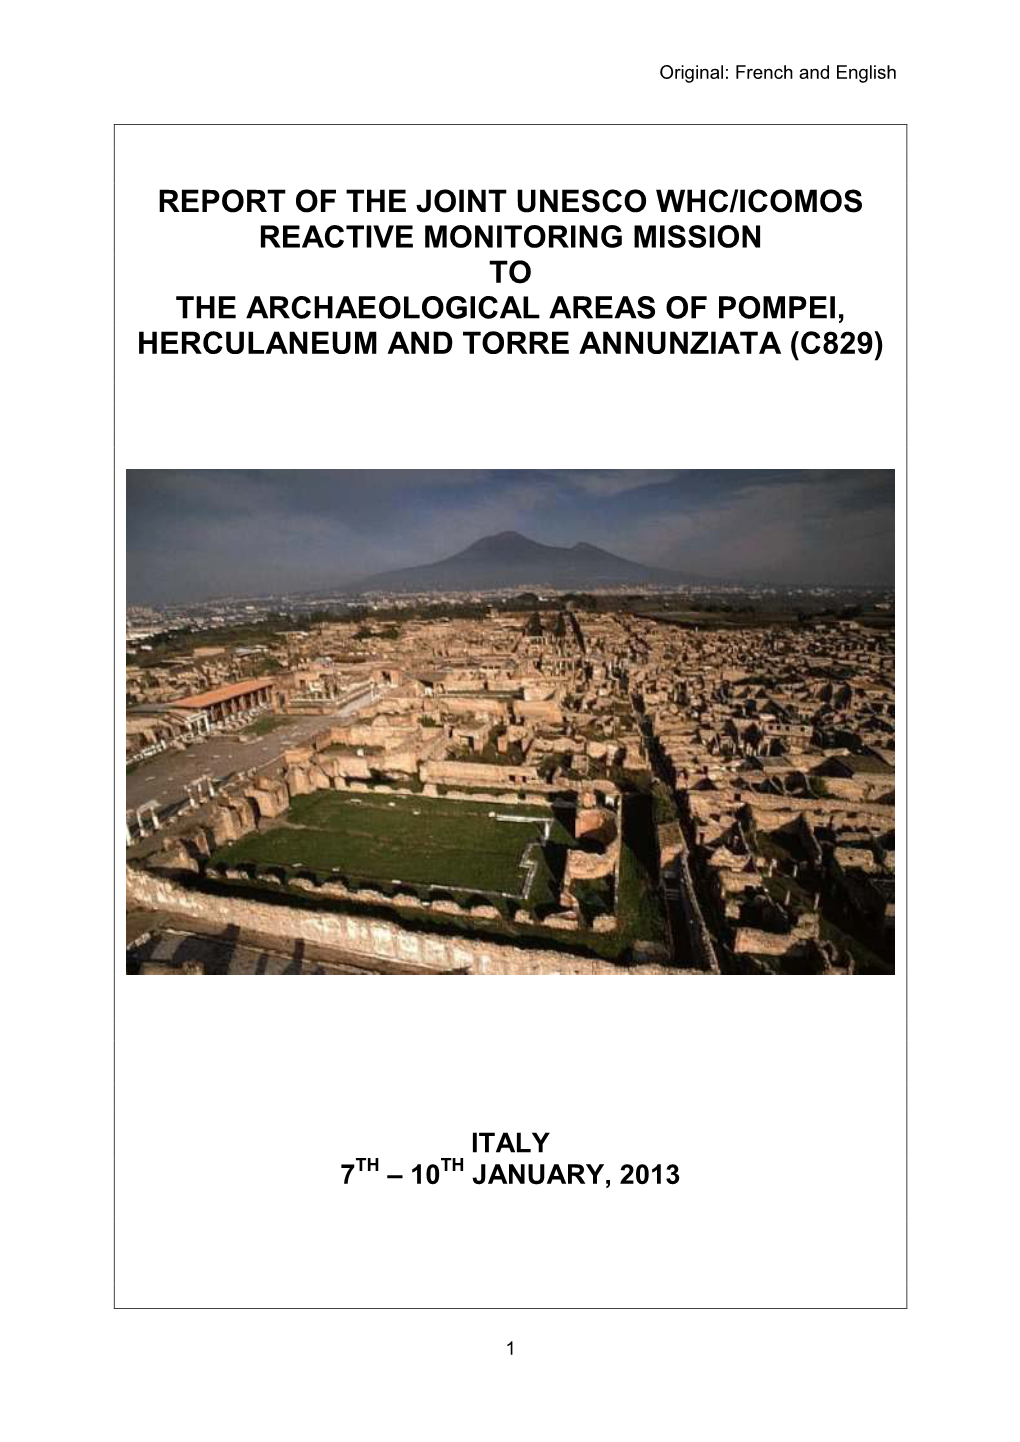 Joint World Heritage Centre/ICOMOS Reactive Monitoring Mission to Pompei, Hercolaneum and Torre Annunziata (Italy) Report, 7-10